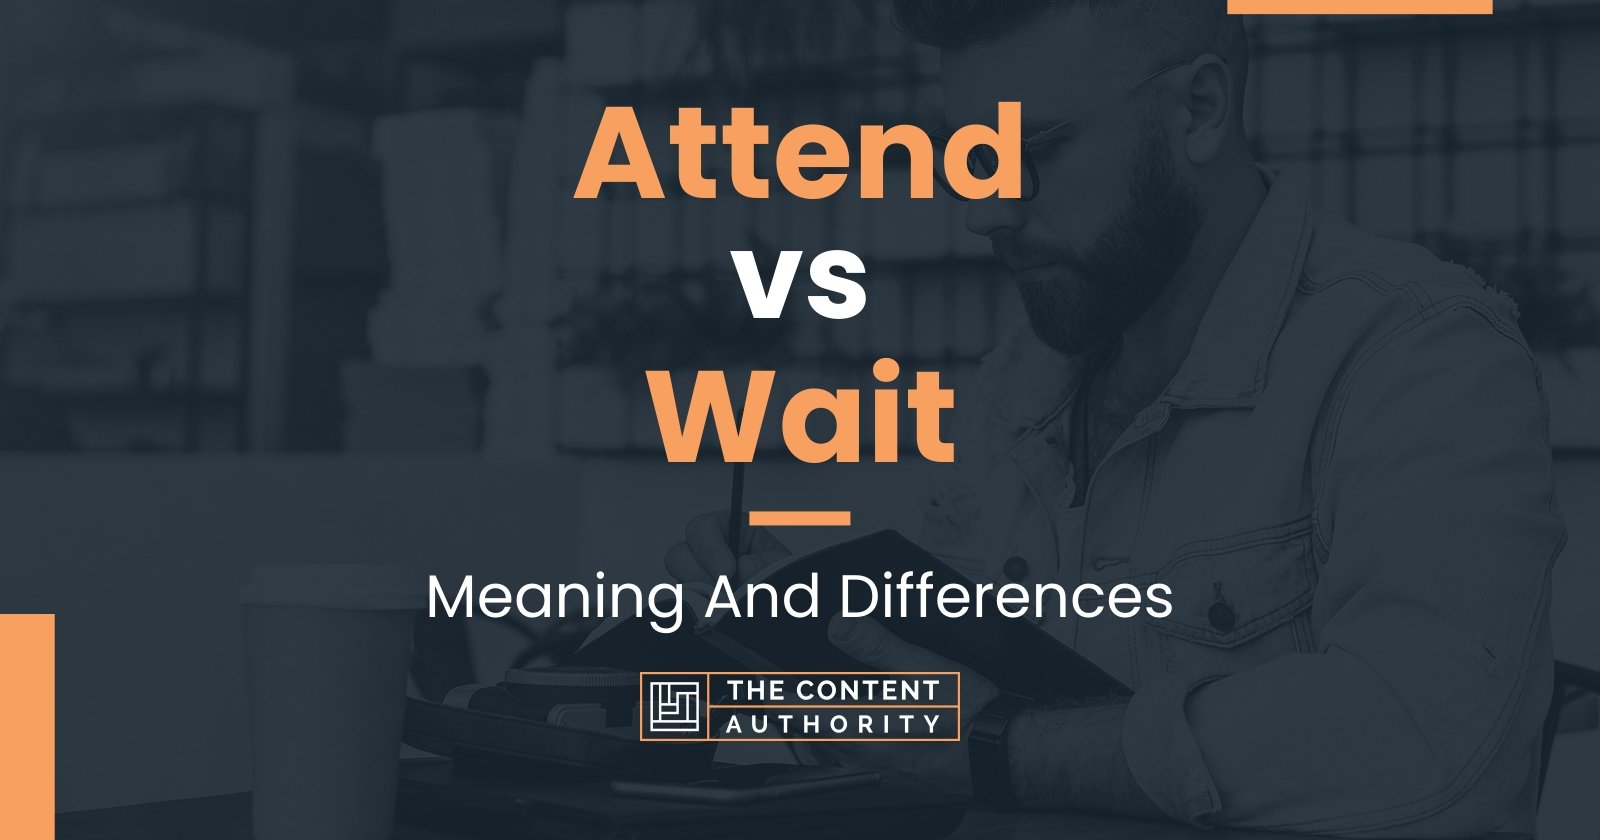 Attend vs Wait: Meaning And Differences